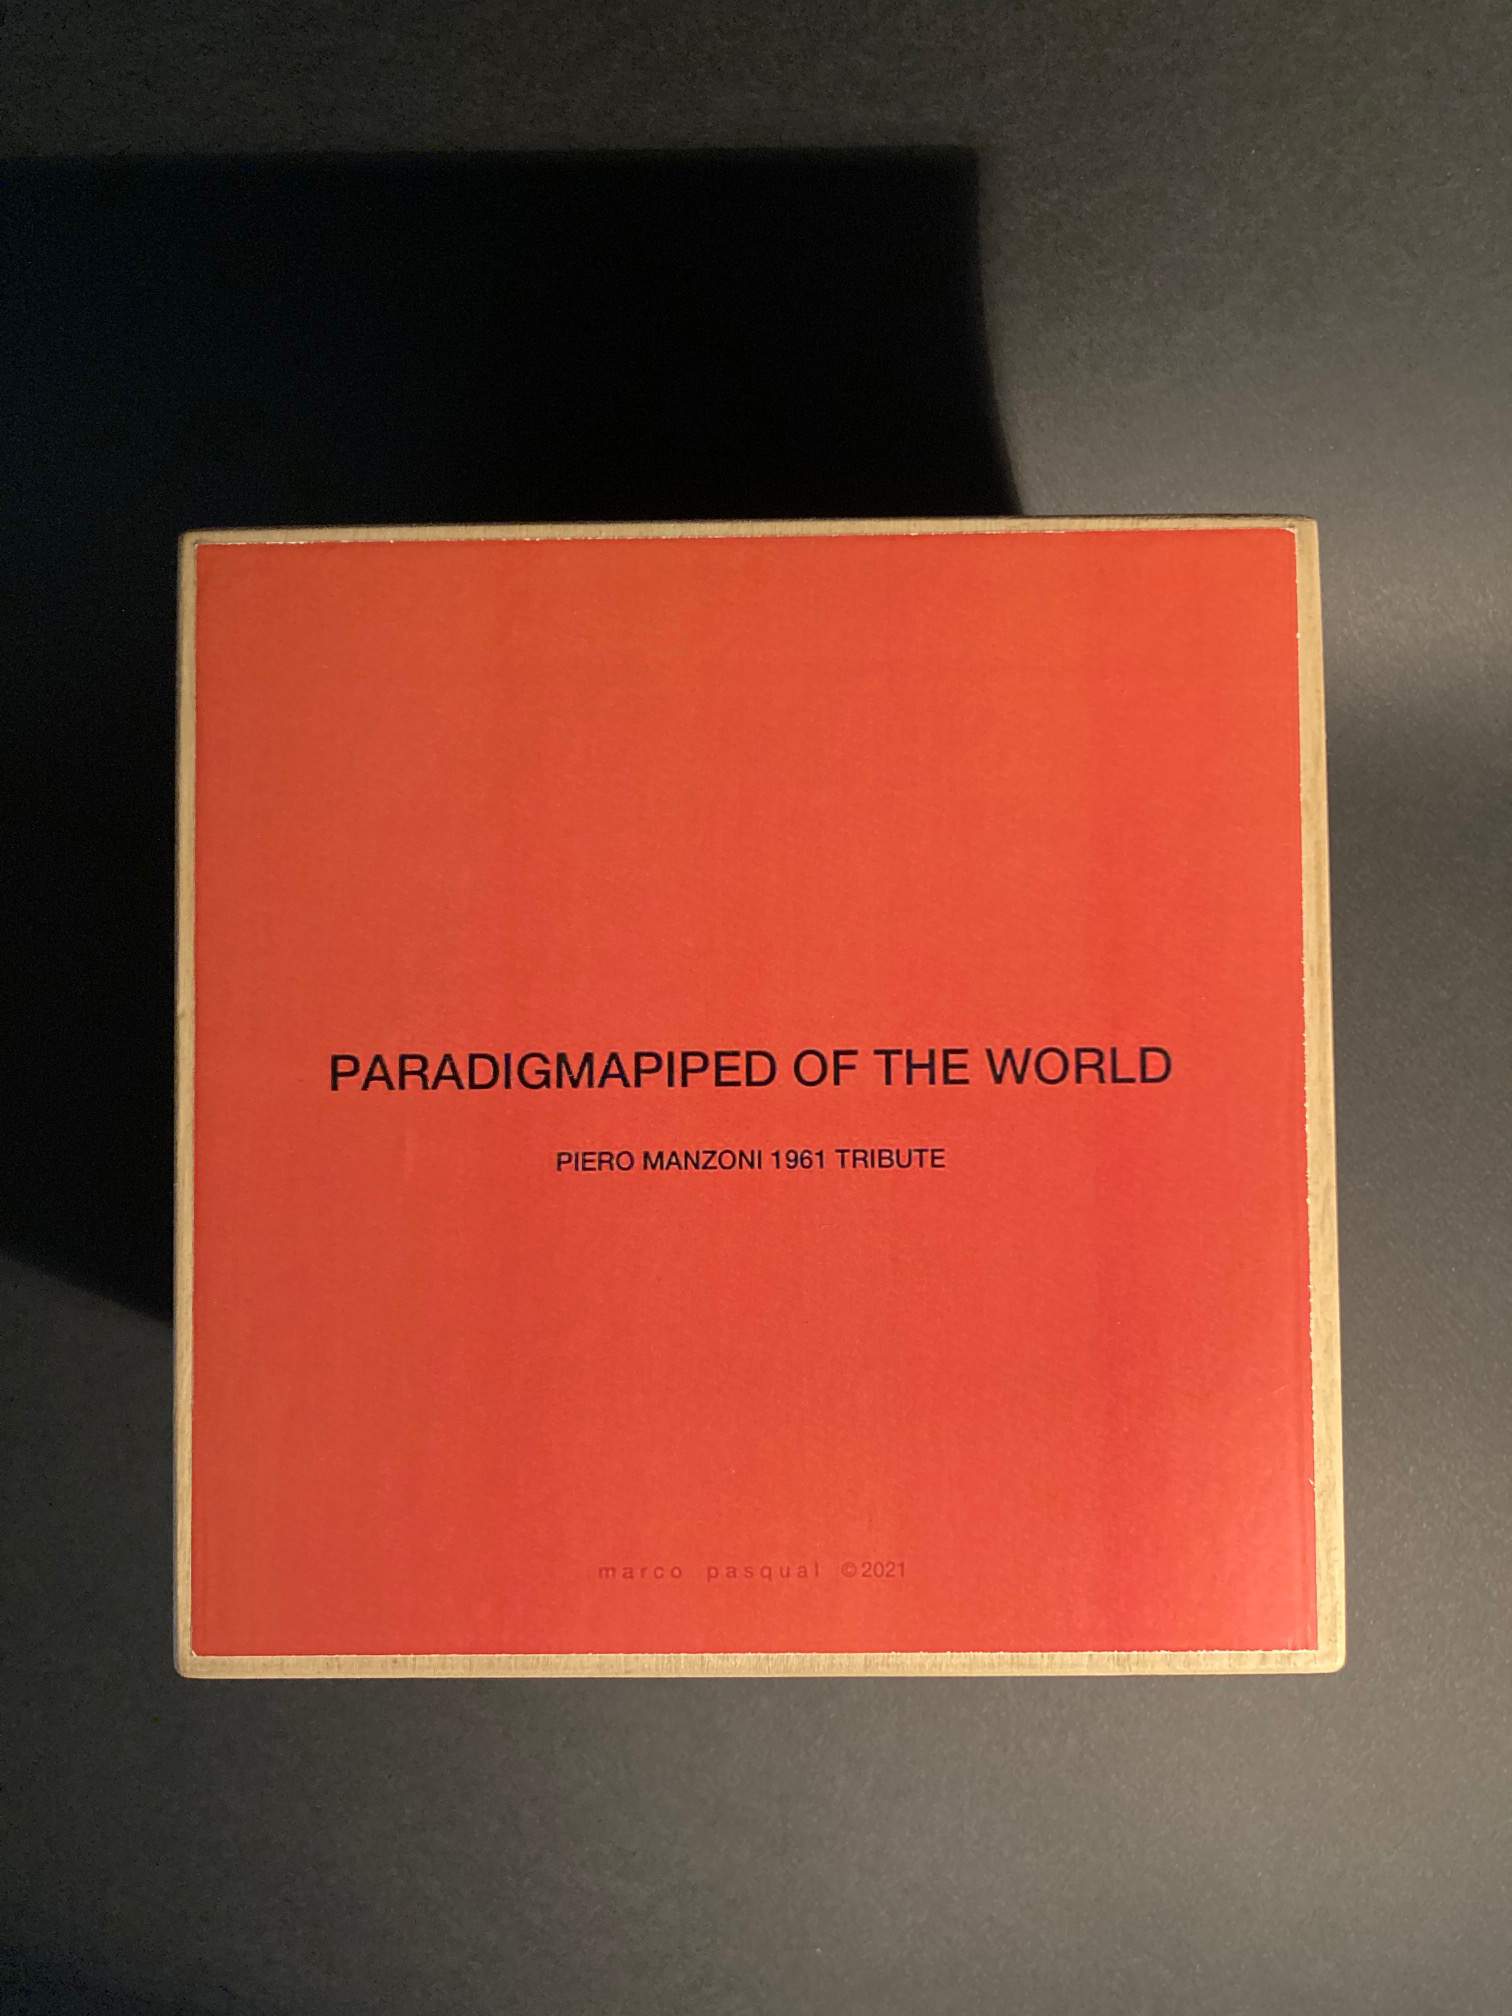 PARADIGMAPIPED OF THE WORLD